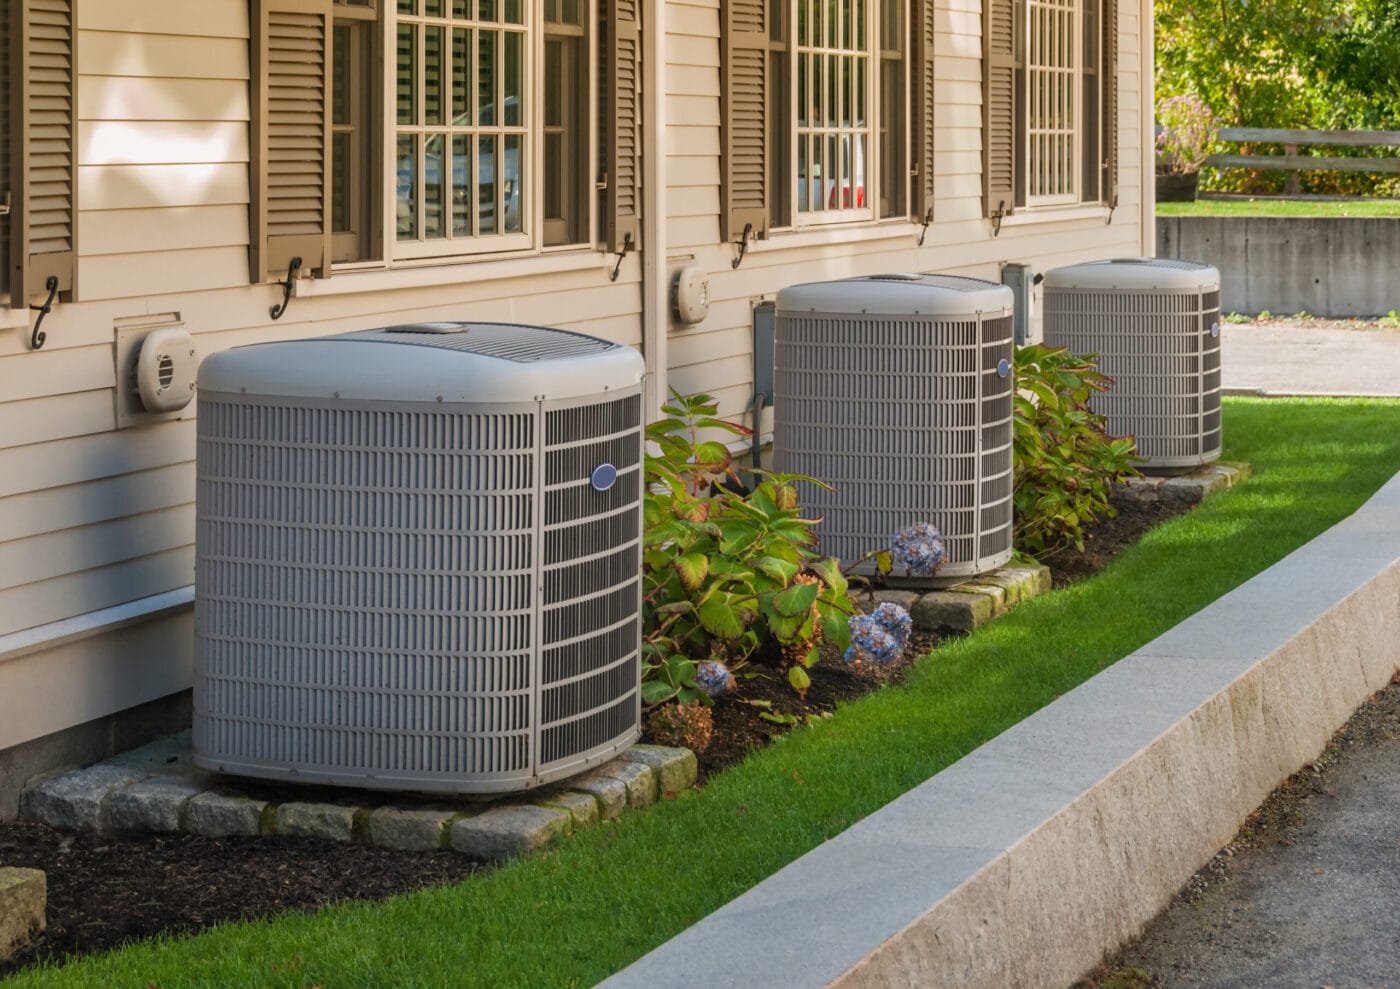 Line of HVAC units with nice landscaping